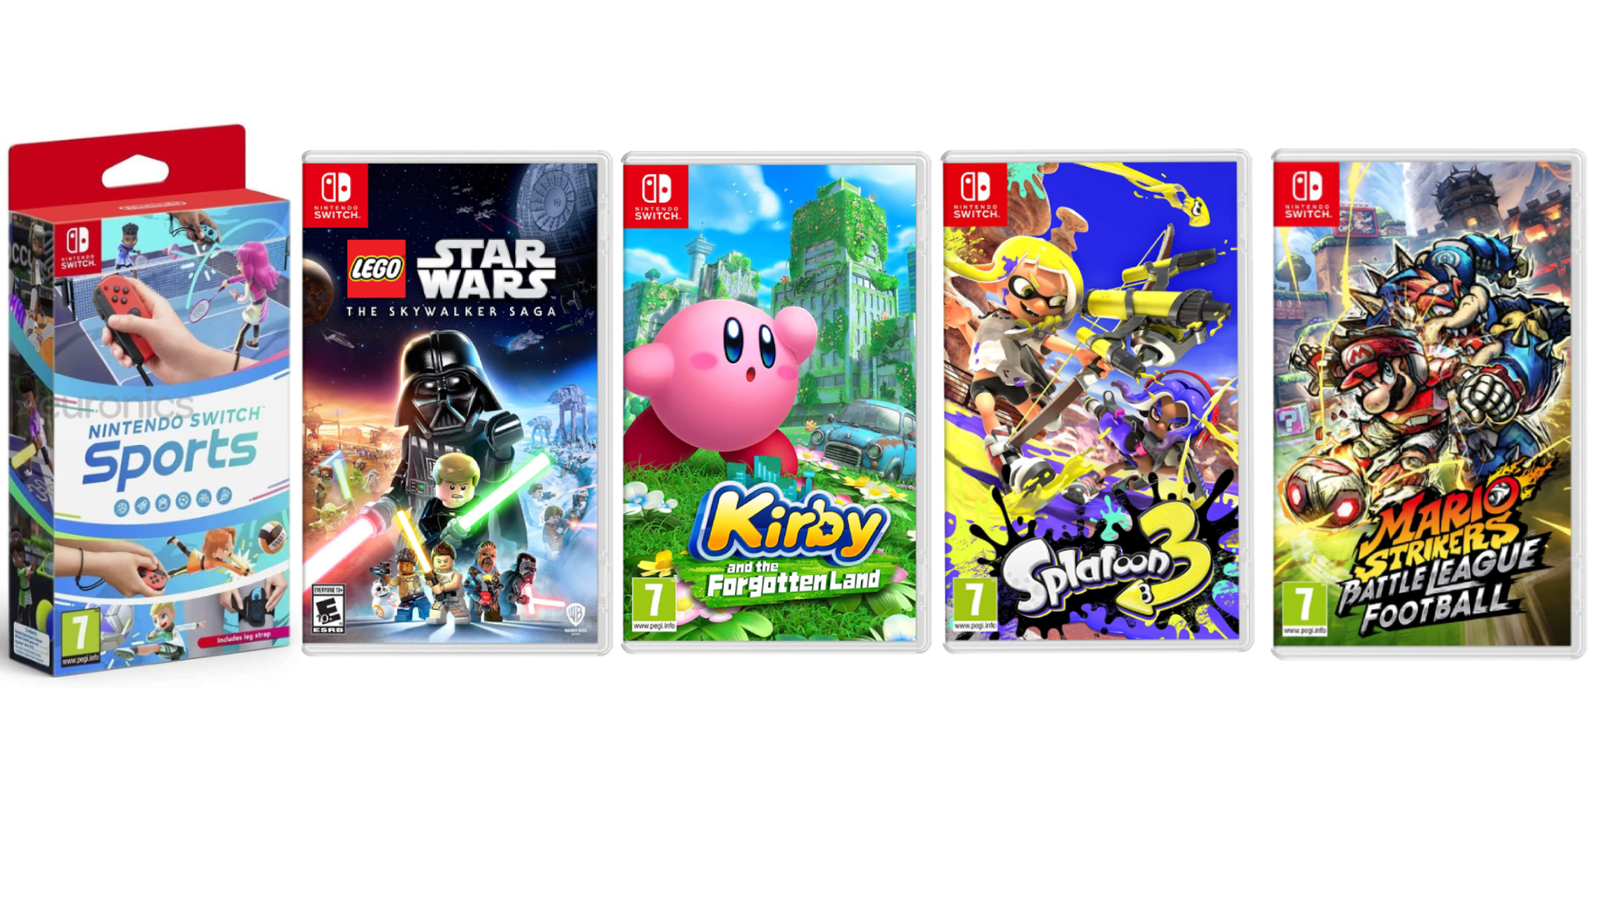 https://assetsio.reedpopcdn.com/nintendo-switch-games-25-percent-off-amazon.jpg?width=1600&height=900&fit=crop&quality=100&format=png&enable=upscale&auto=webp